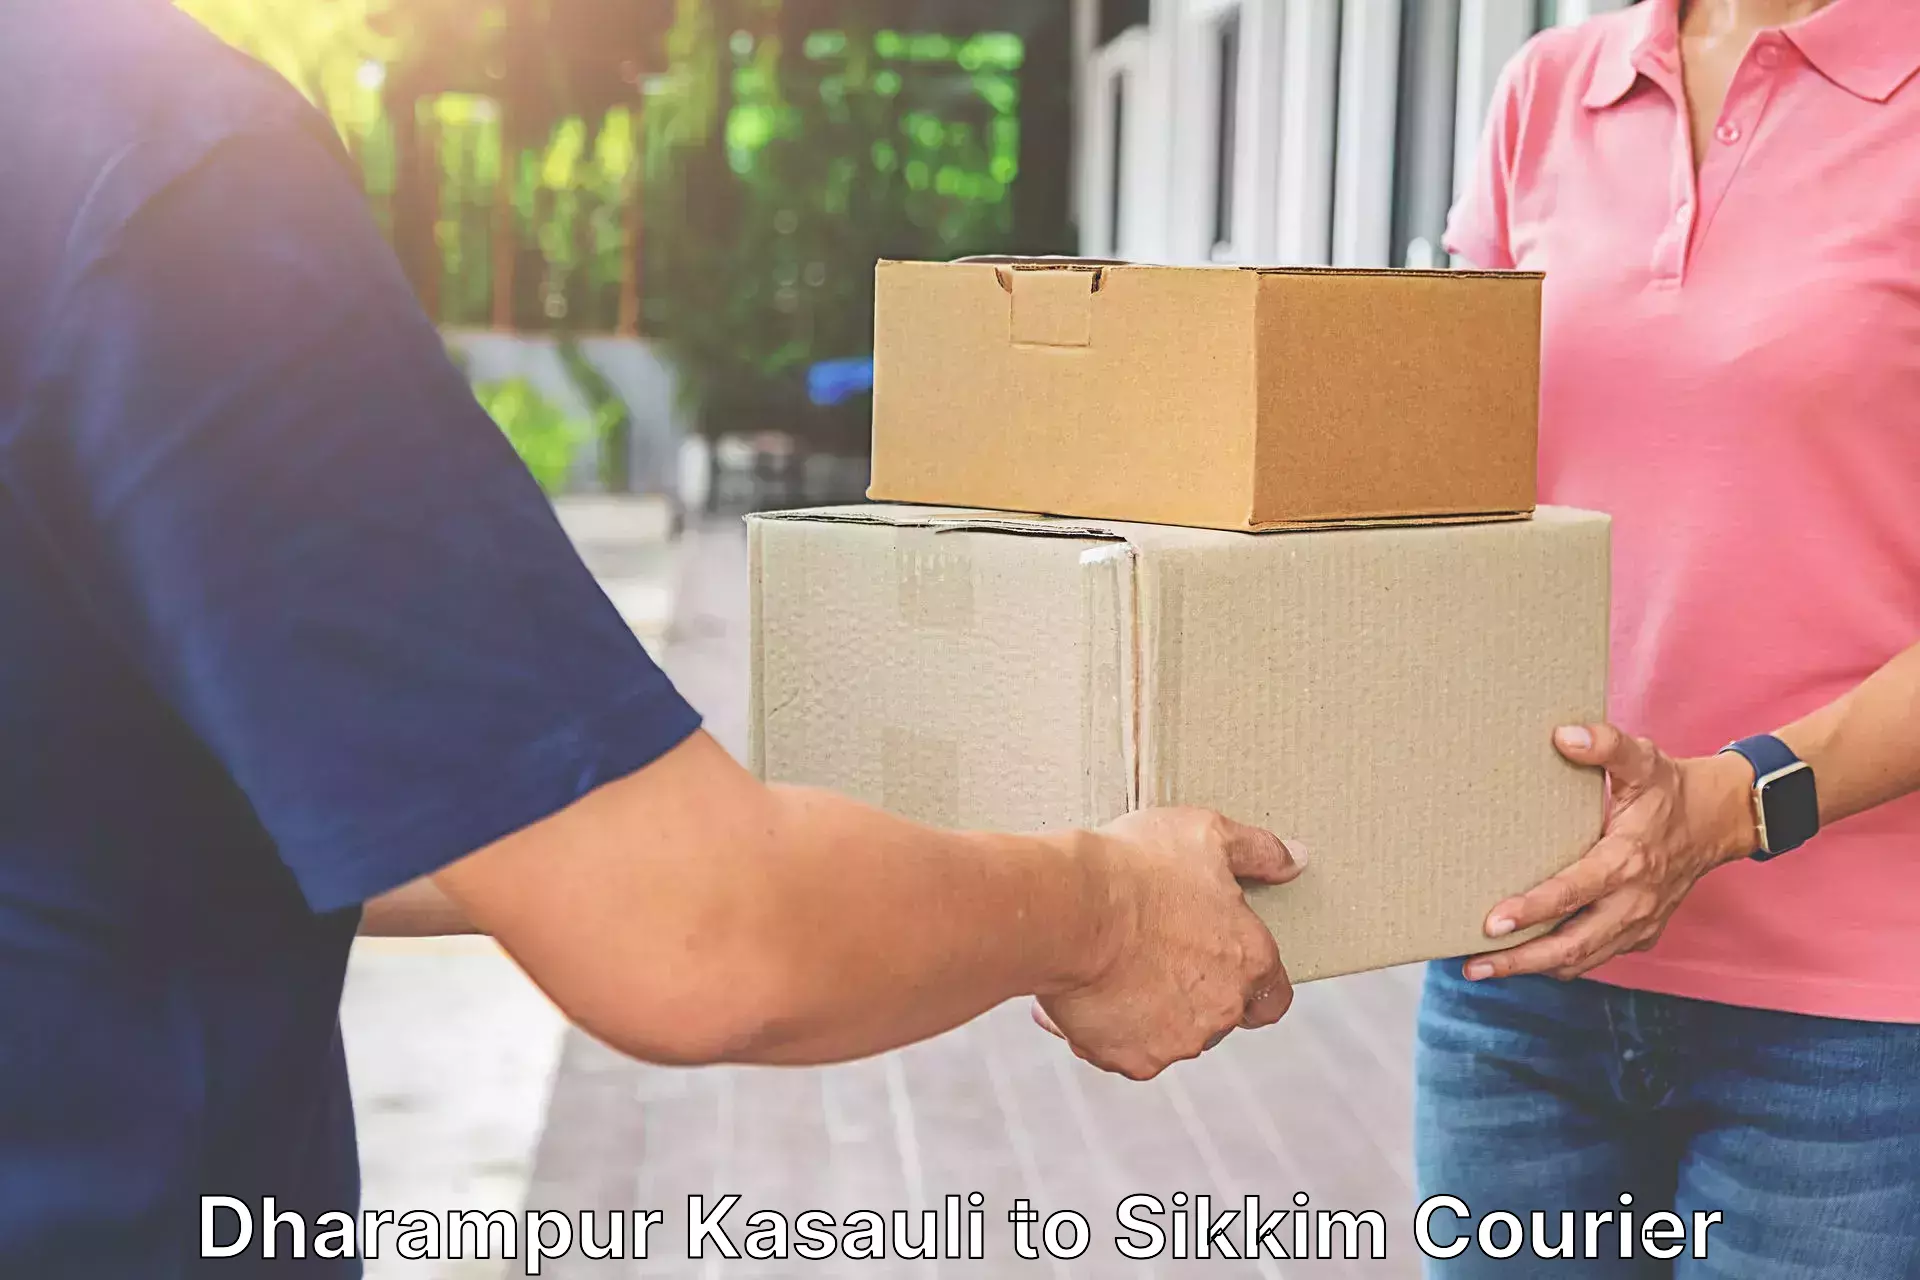 Flexible parcel services Dharampur Kasauli to Ranipool